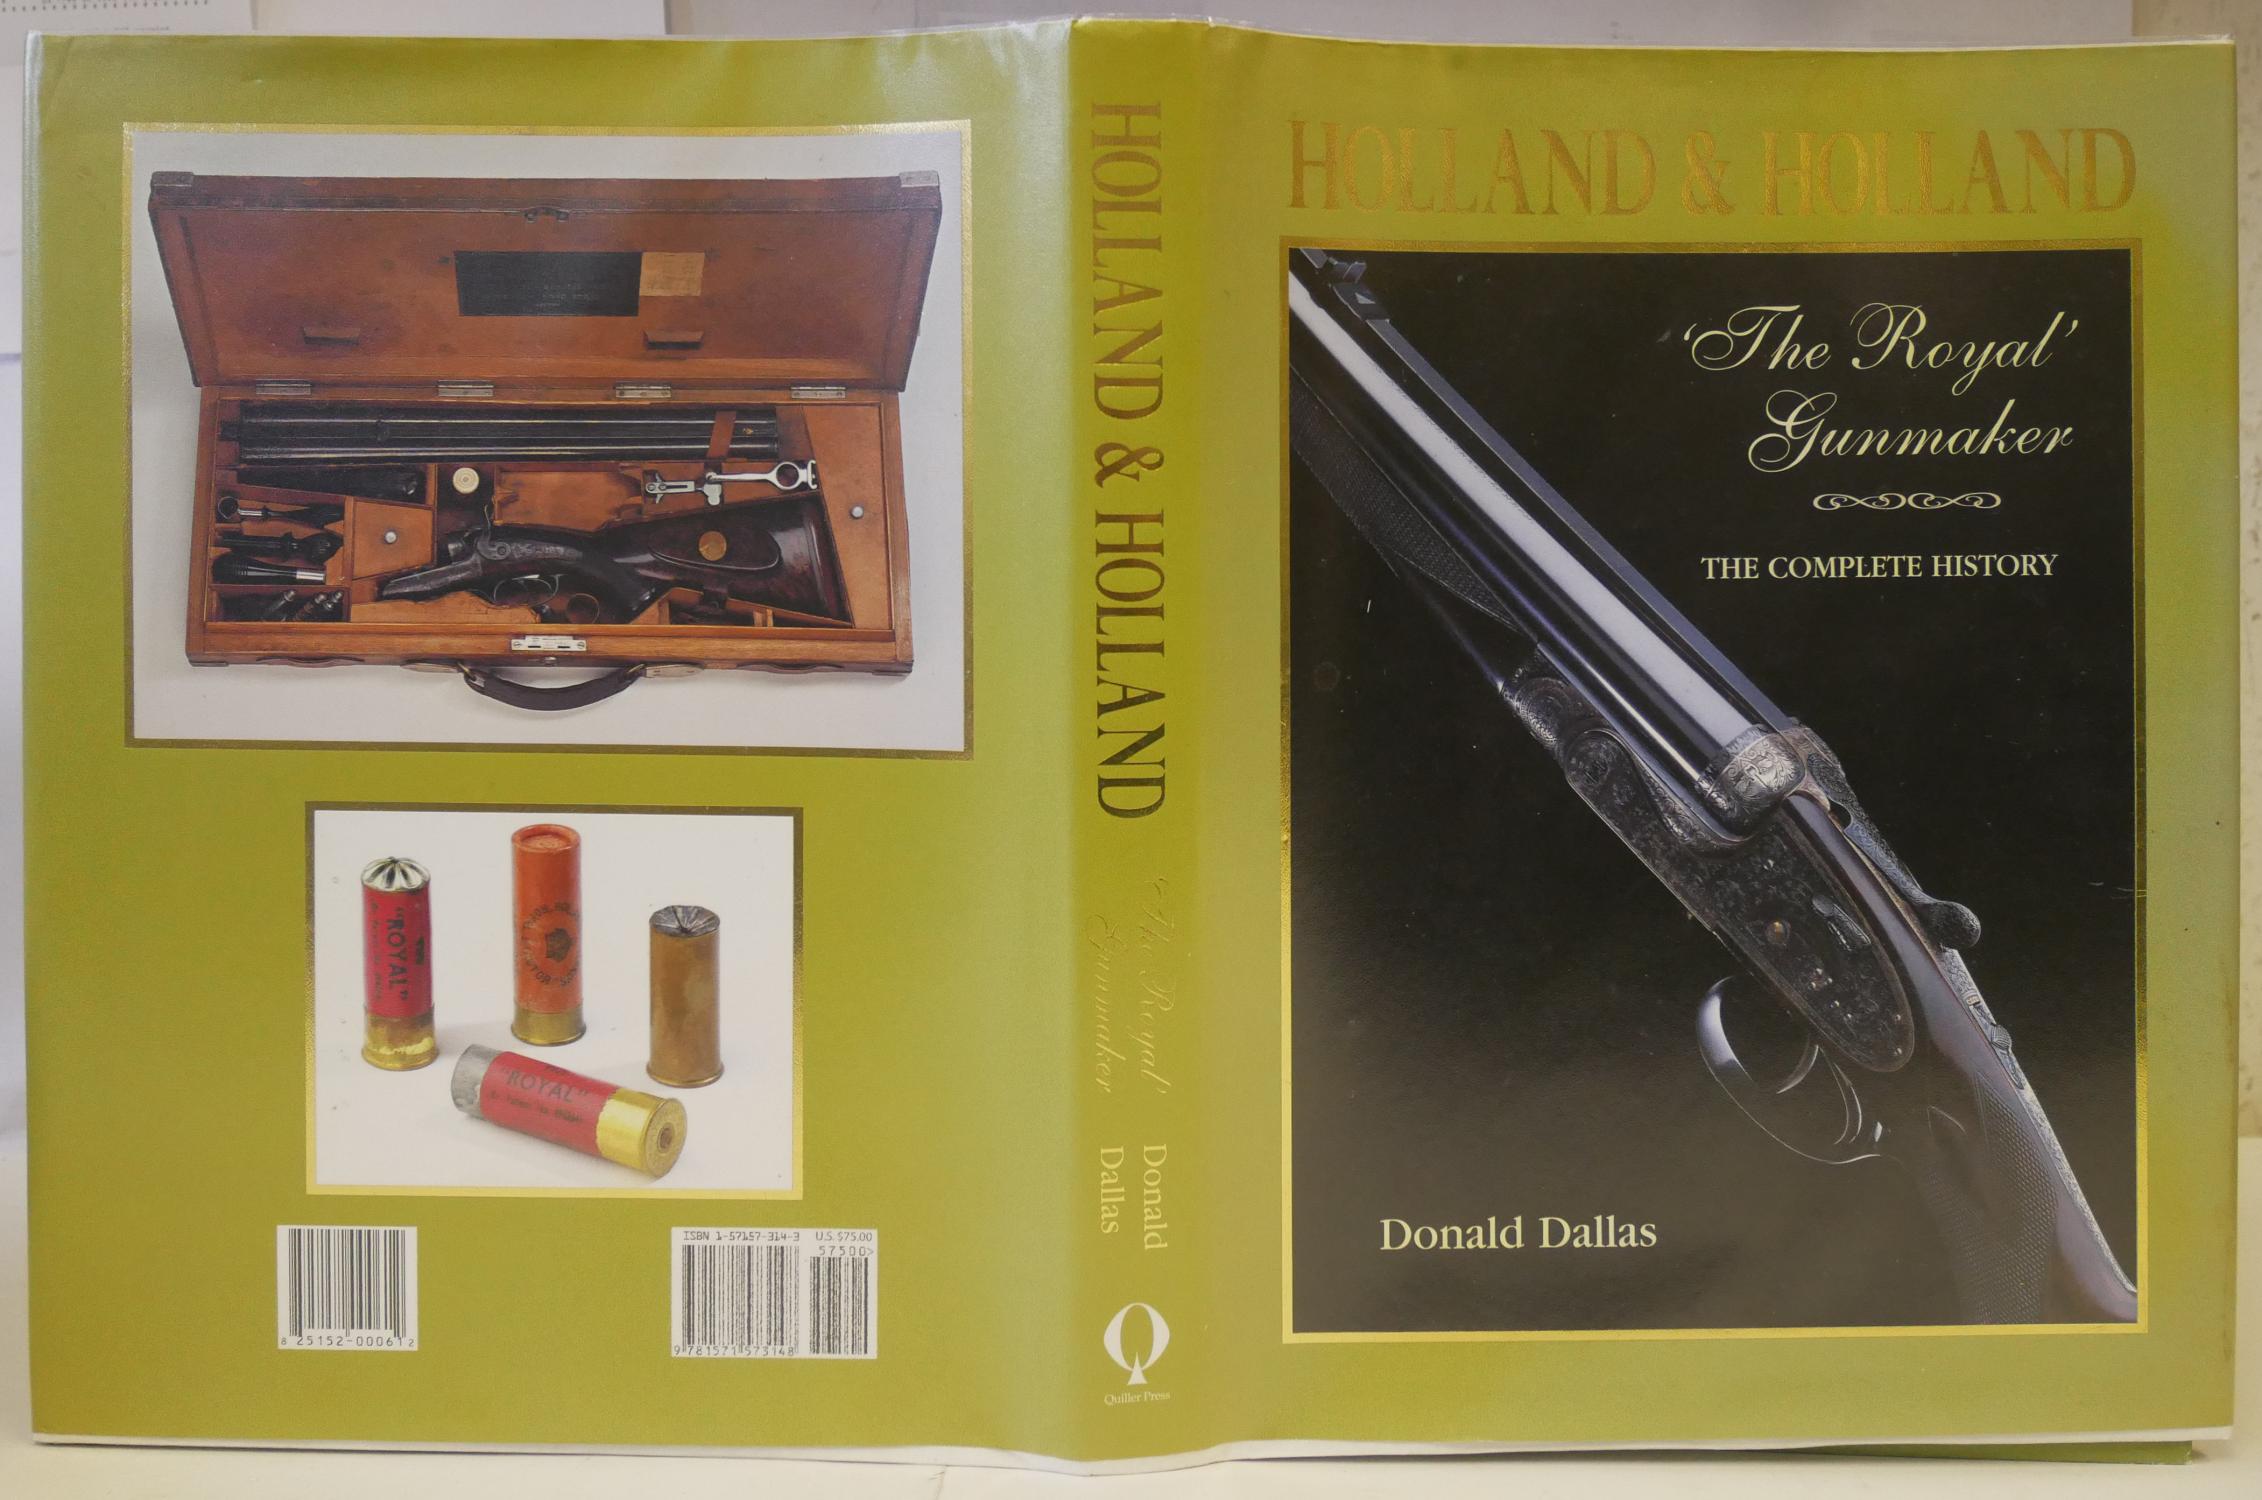 Holland & Holland The Royal Gunmaker The Complete History - DALLAS Donald